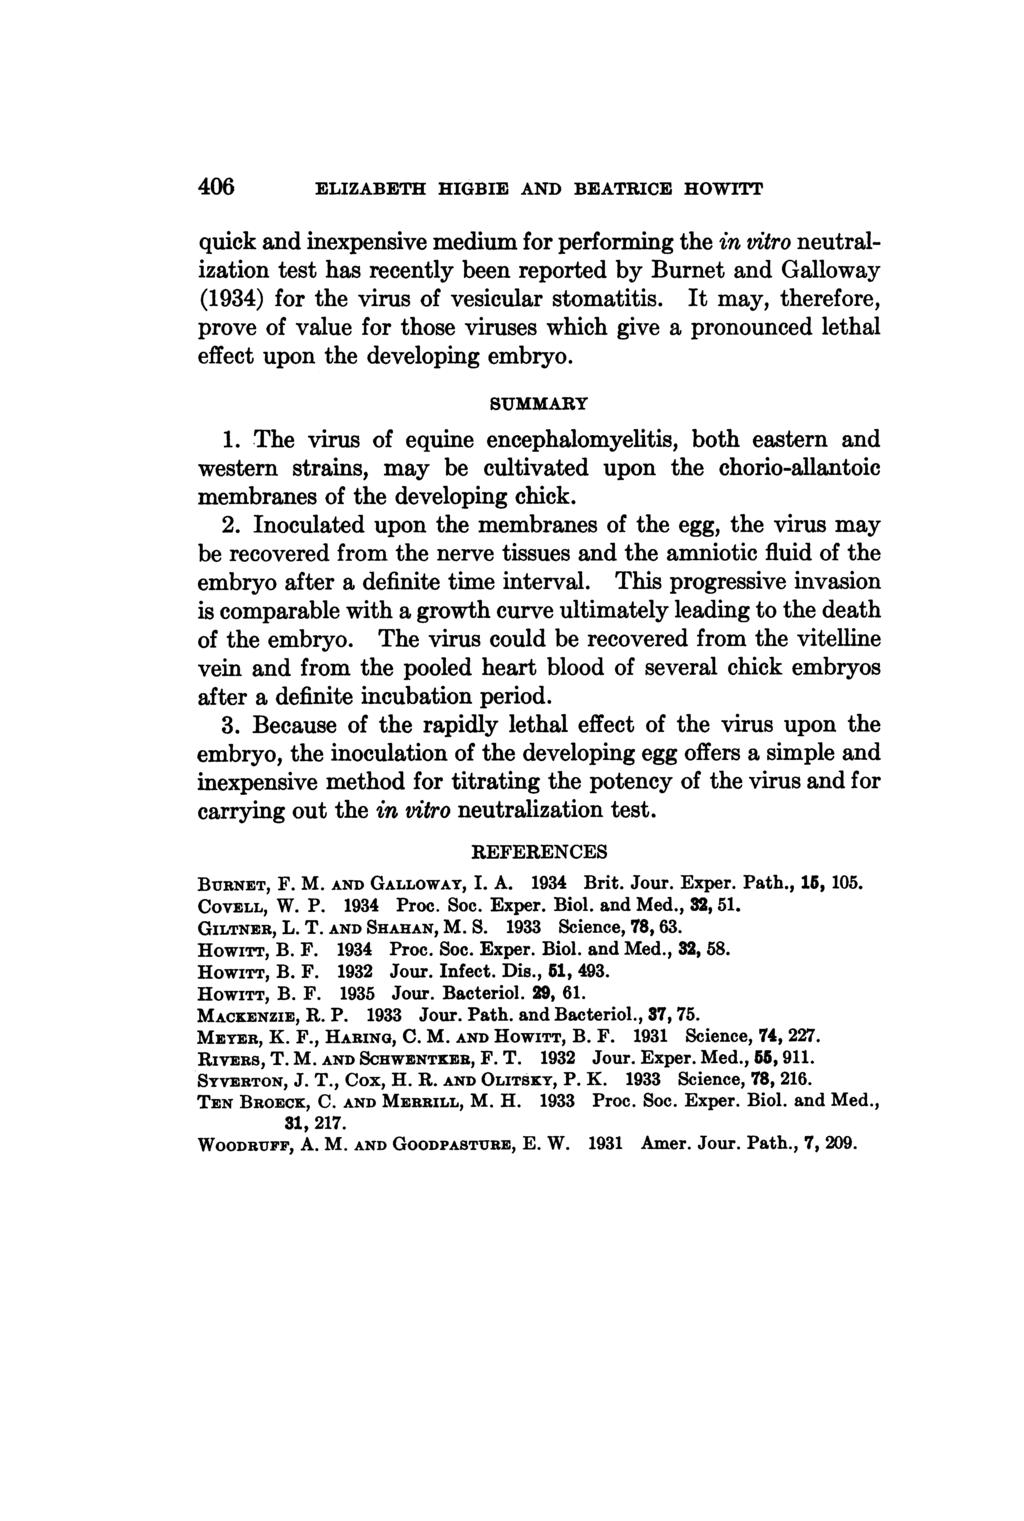 406 ELIZABETH HIGBIE AND BEATRICE HOWITf quick and inexpensive medium for performing the in vitro neutralization test has recently been reported by Burnet and Galloway (1934) for the virus of